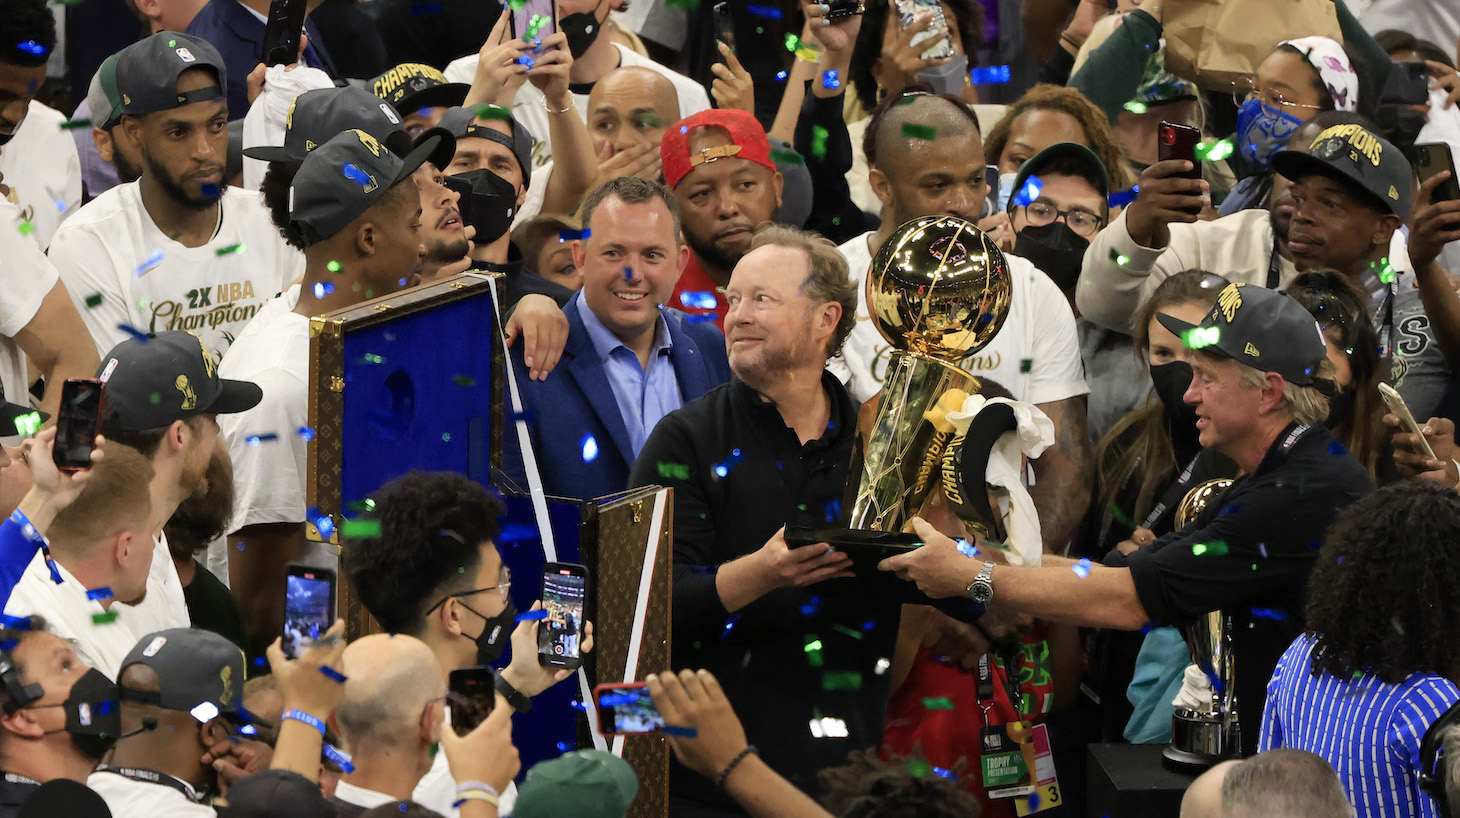 MILWAUKEE, WISCONSIN - JULY 20: Head coach Mike Budenholzer of the Milwaukee Bucks celebrates after defeating the Phoenix Suns in Game Six to win the 2021 NBA Finals at Fiserv Forum on July 20, 2021 in Milwaukee, Wisconsin. NOTE TO USER: User expressly acknowledges and agrees that, by downloading and or using this photograph, User is consenting to the terms and conditions of the Getty Images License Agreement. (Photo by Justin Casterline/Getty Images)